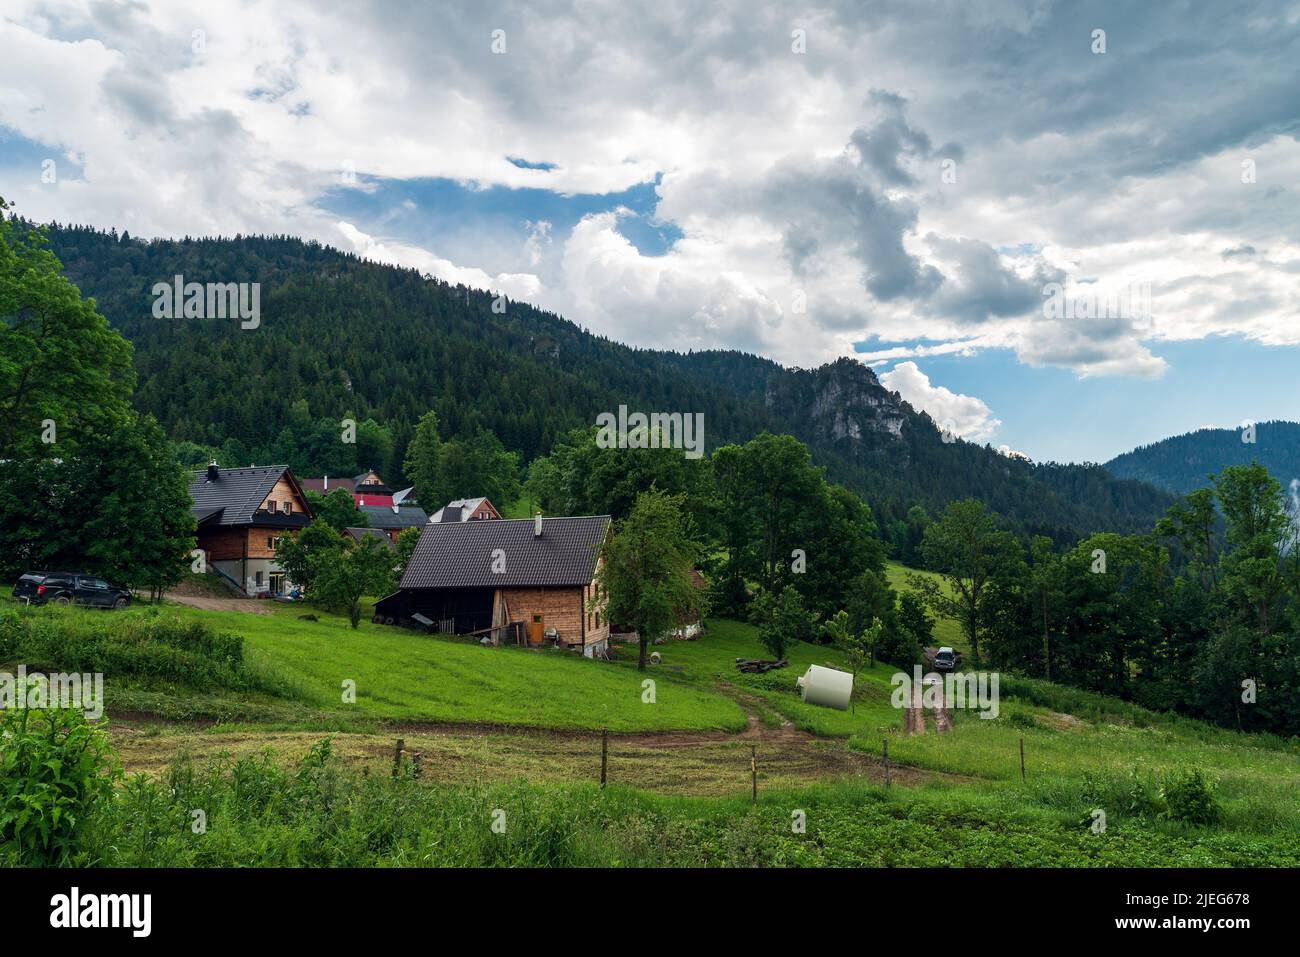 Podrozsutec hamlet bellow Maly Rozsutec hill in Mala Fatra mountains in Slovakia during summer day with blue sky and clouds Stock Photo